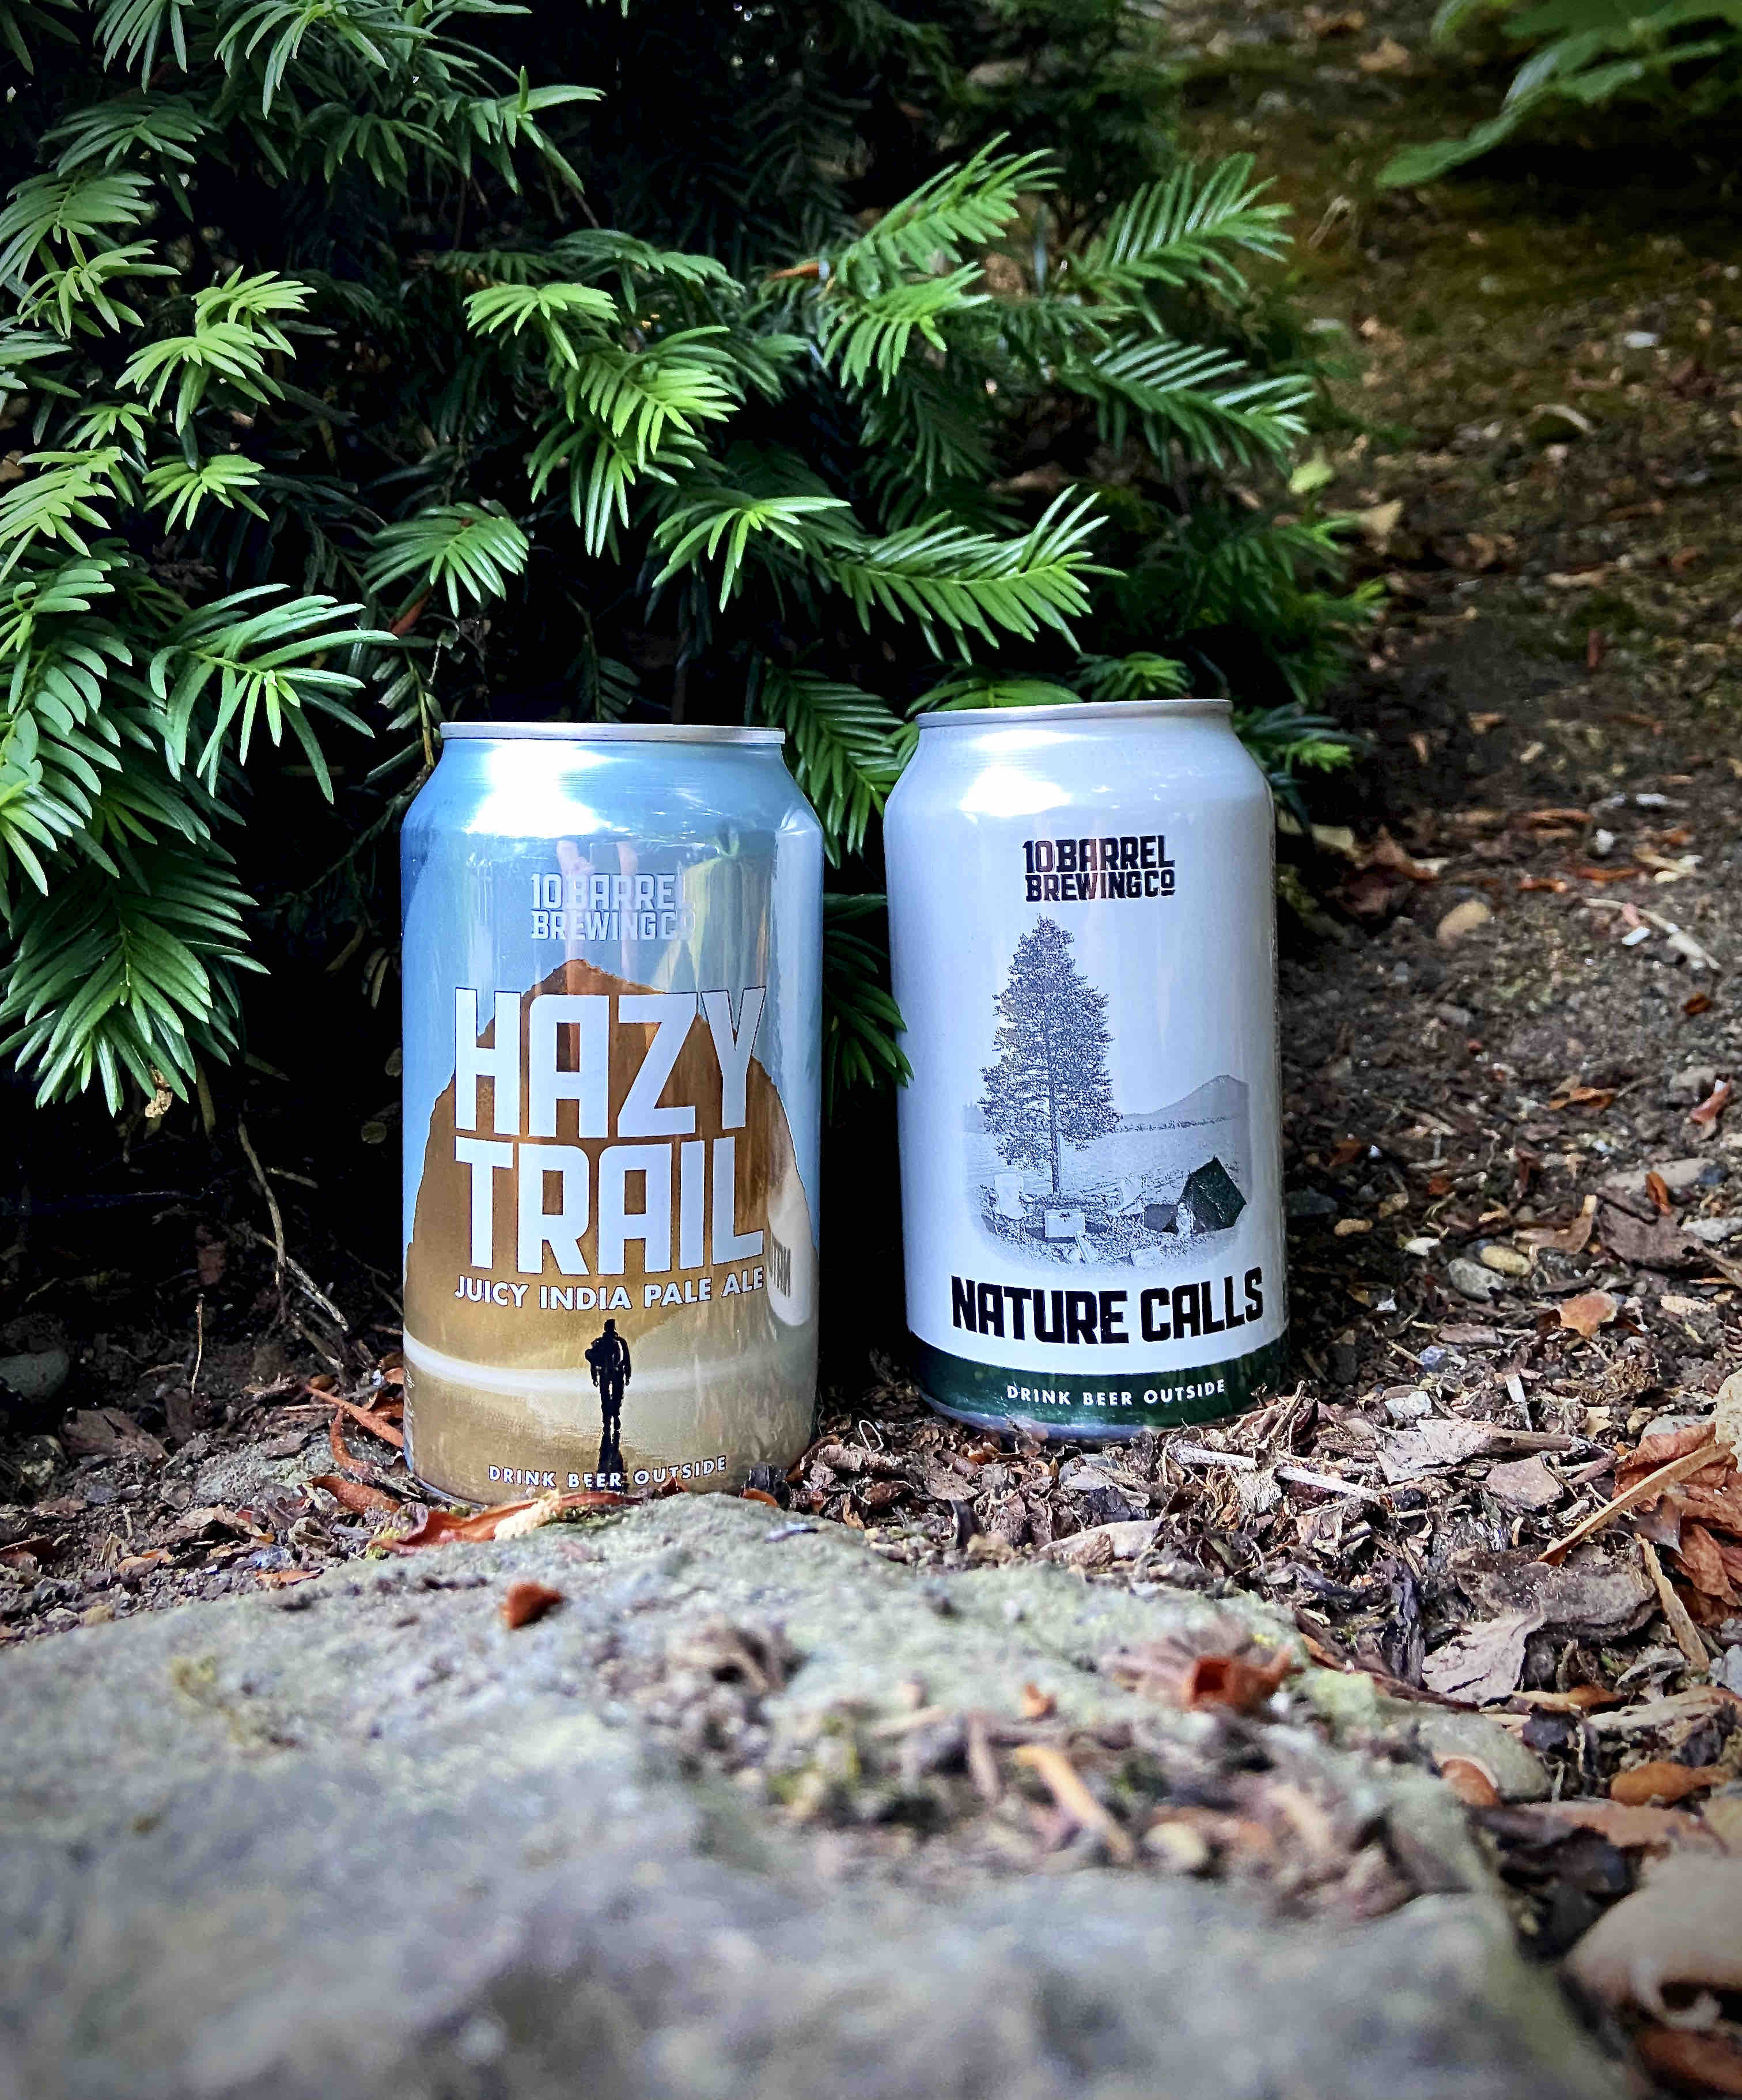 10 Barrel Brewing supports outdoor causes with Hazy Trail IPA and Nature Calls Mountain IPA.